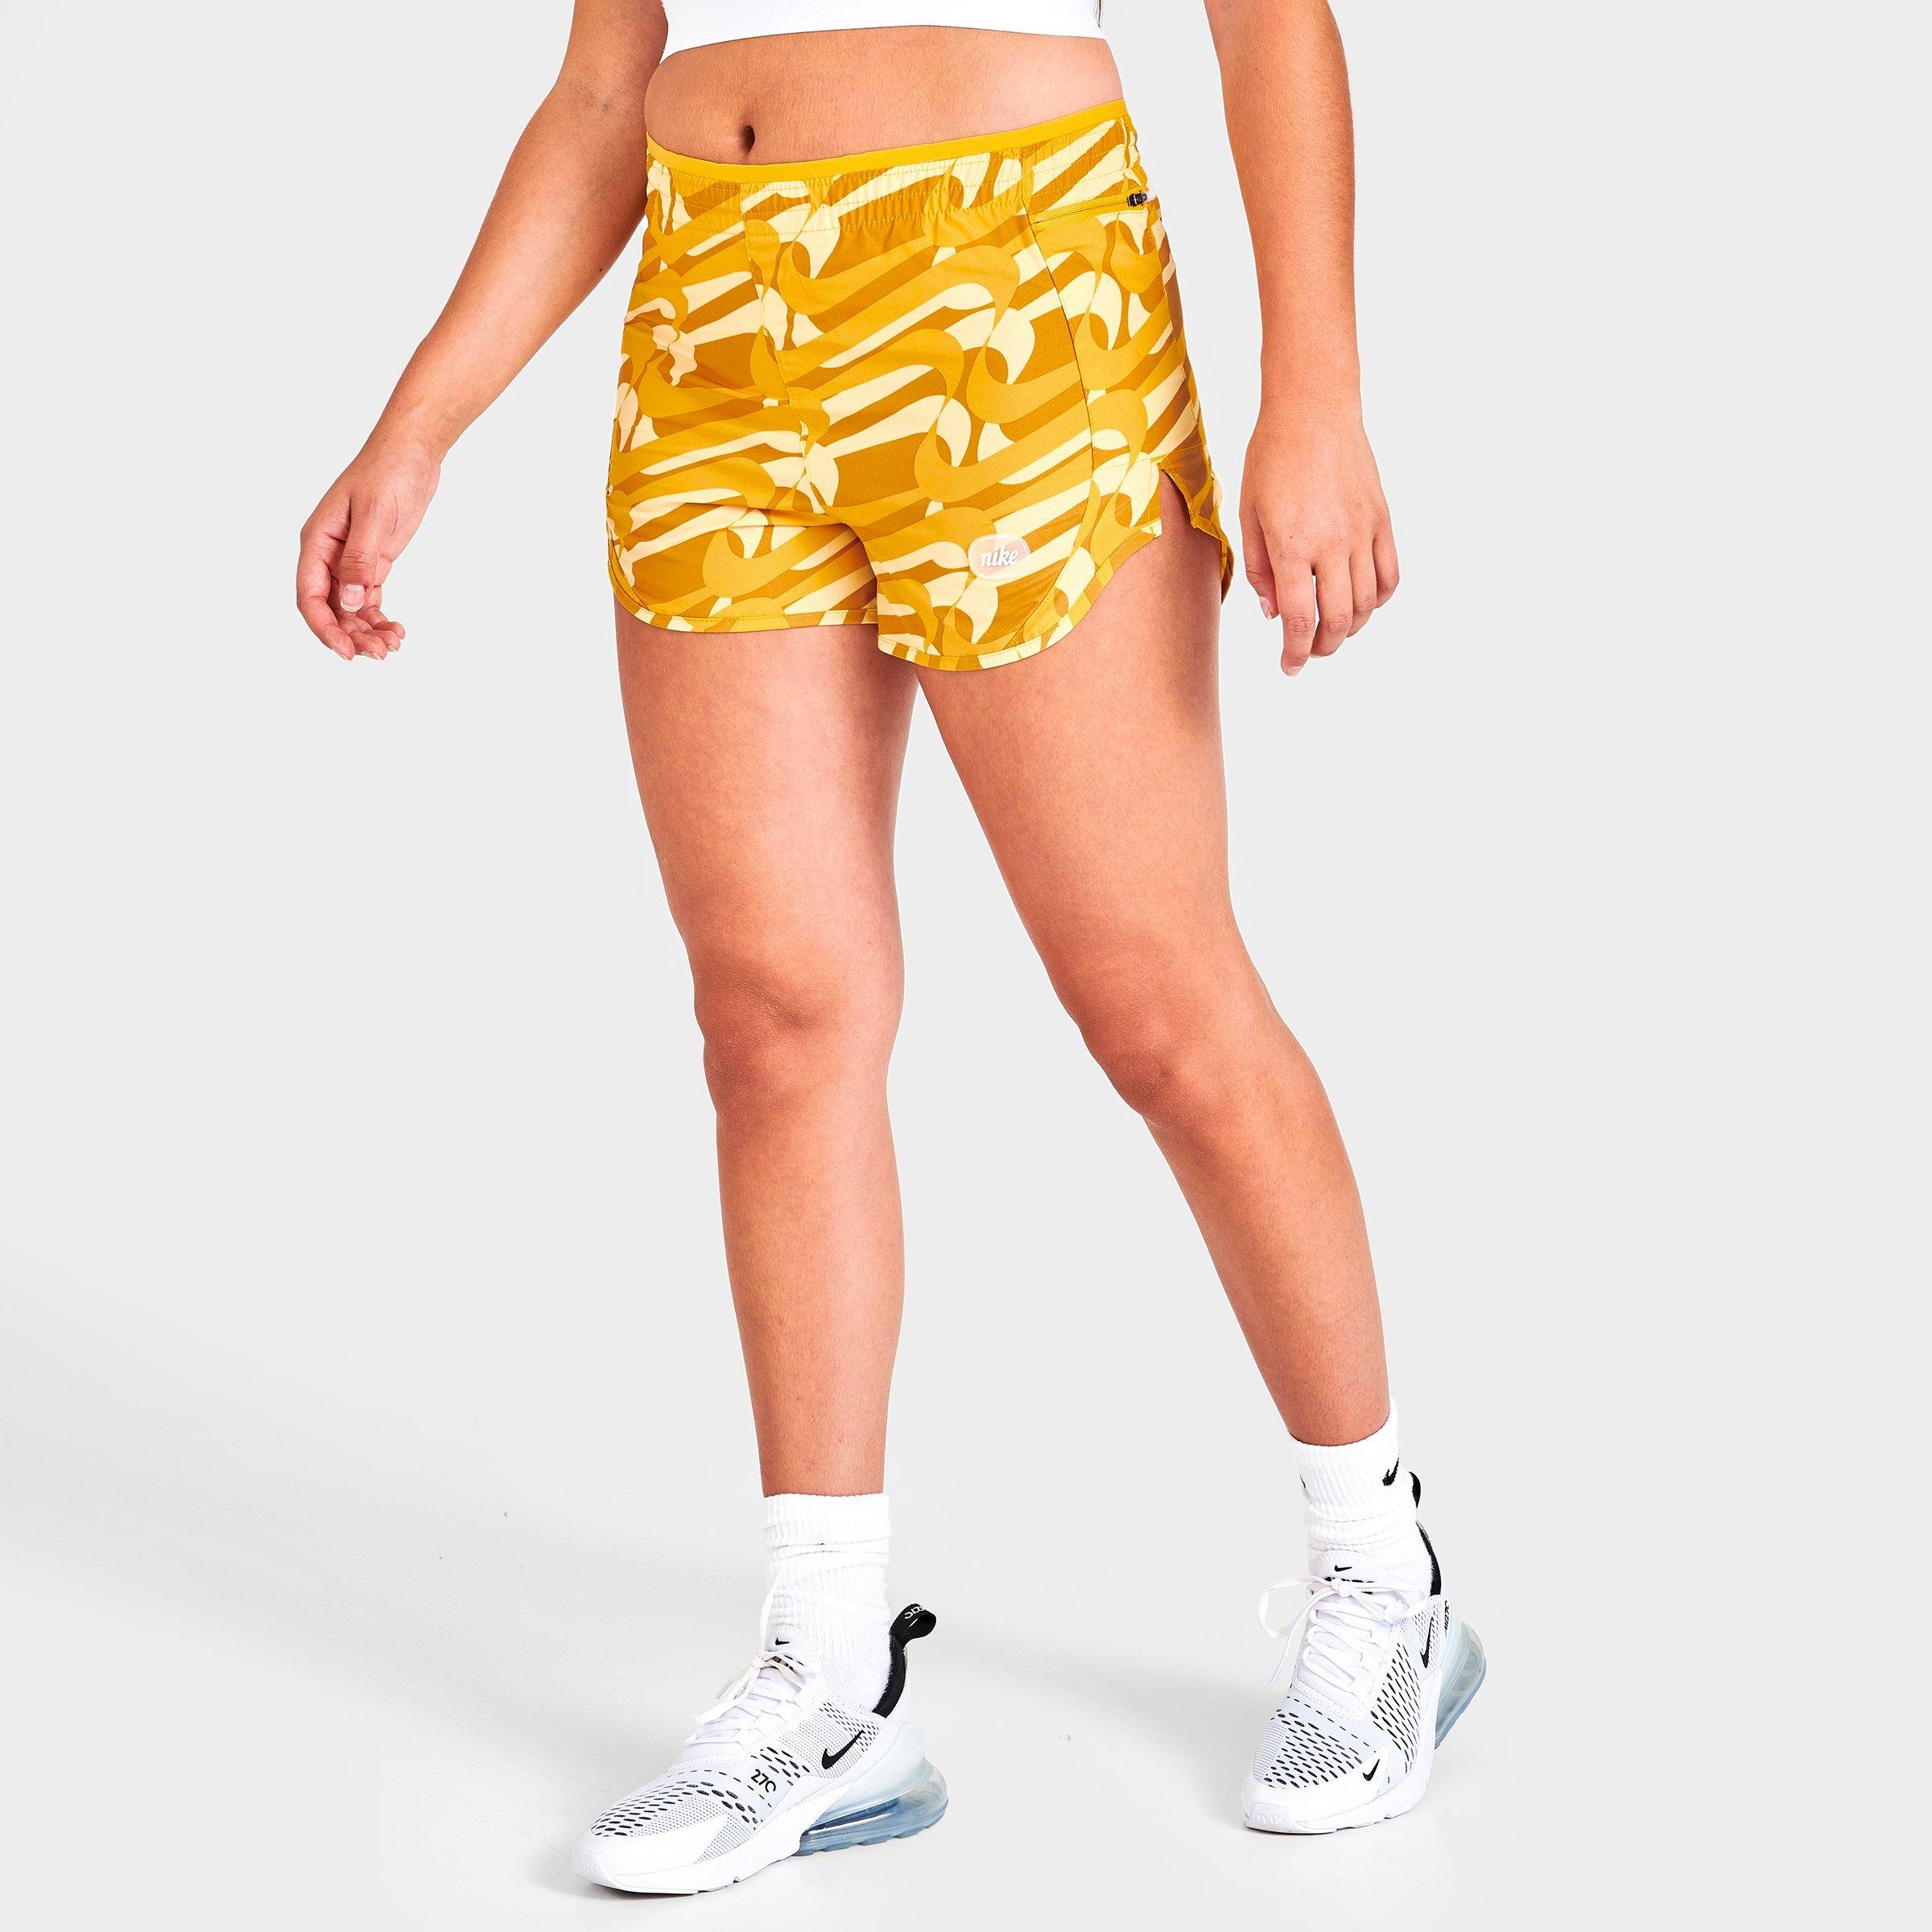 UPC 196149000091 product image for Nike Women's Dri-FIT Icon Clash Tempo Luxe Printed Running Shorts in Yellow/Yell | upcitemdb.com